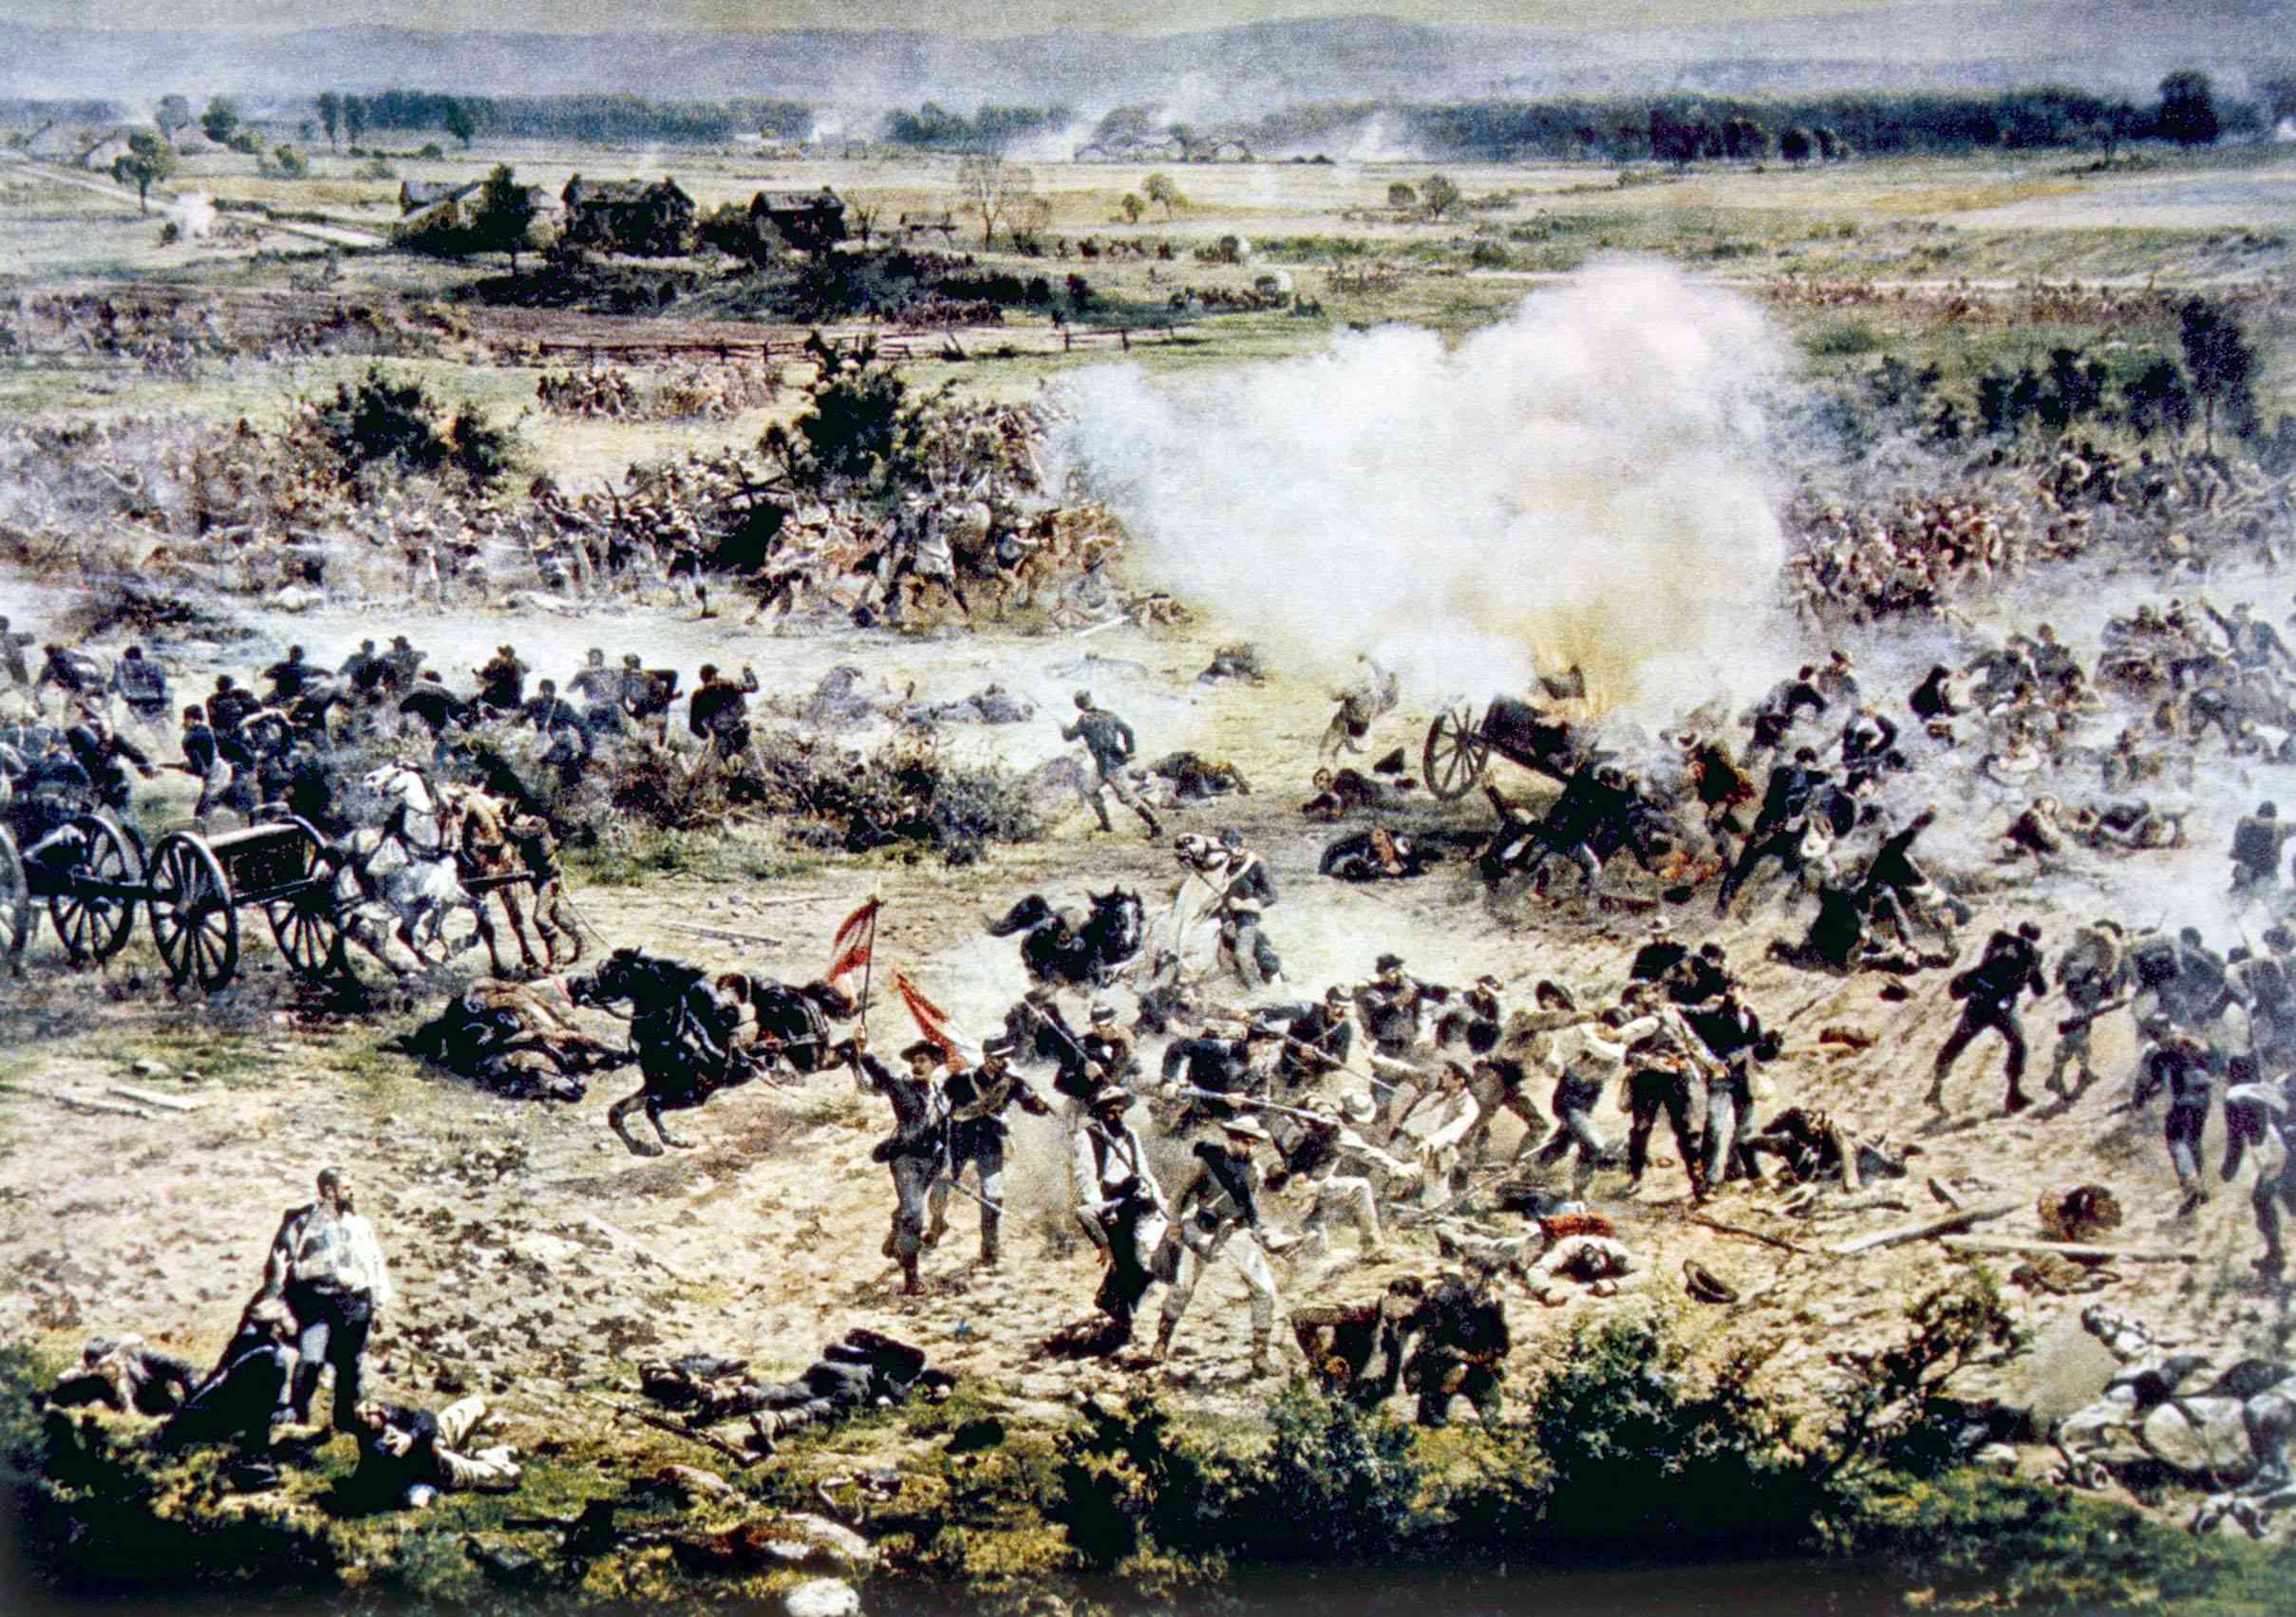 Can you walk Pickett’s Charge at Gettysburg?